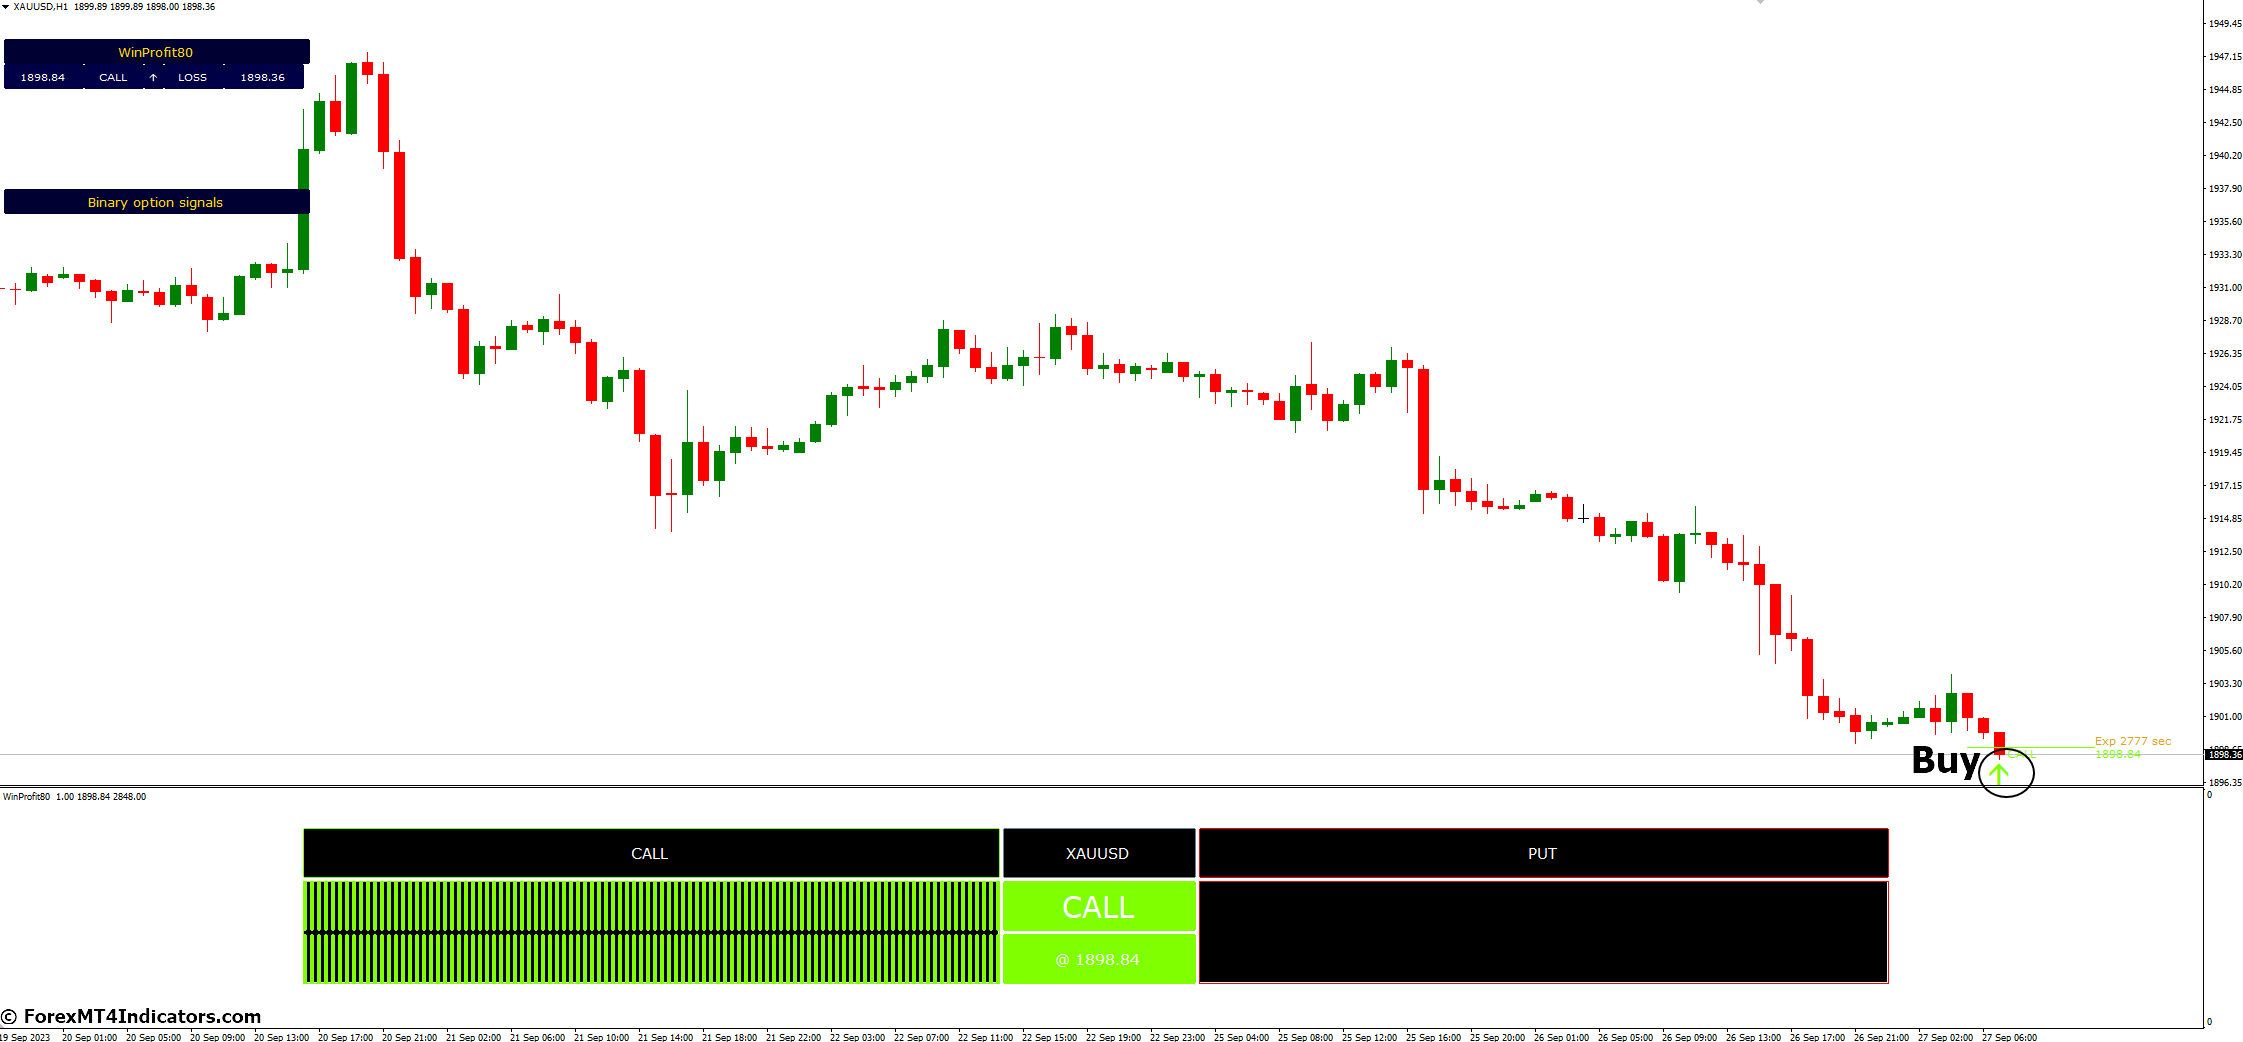 How to Trade with Winprofit80 V2 MT4 Indicator - Buy Entry